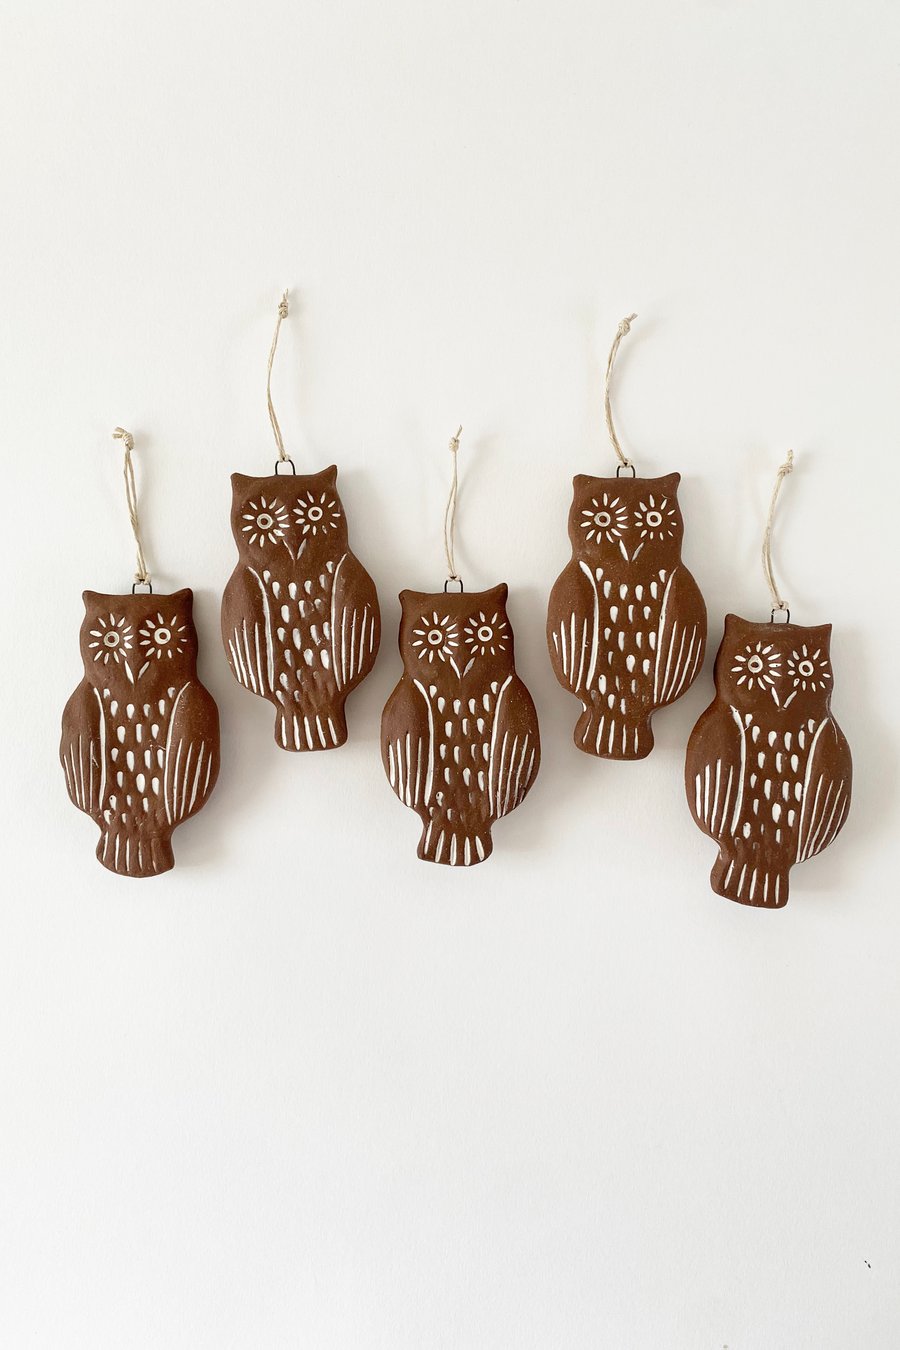 Image of Owl Ornament